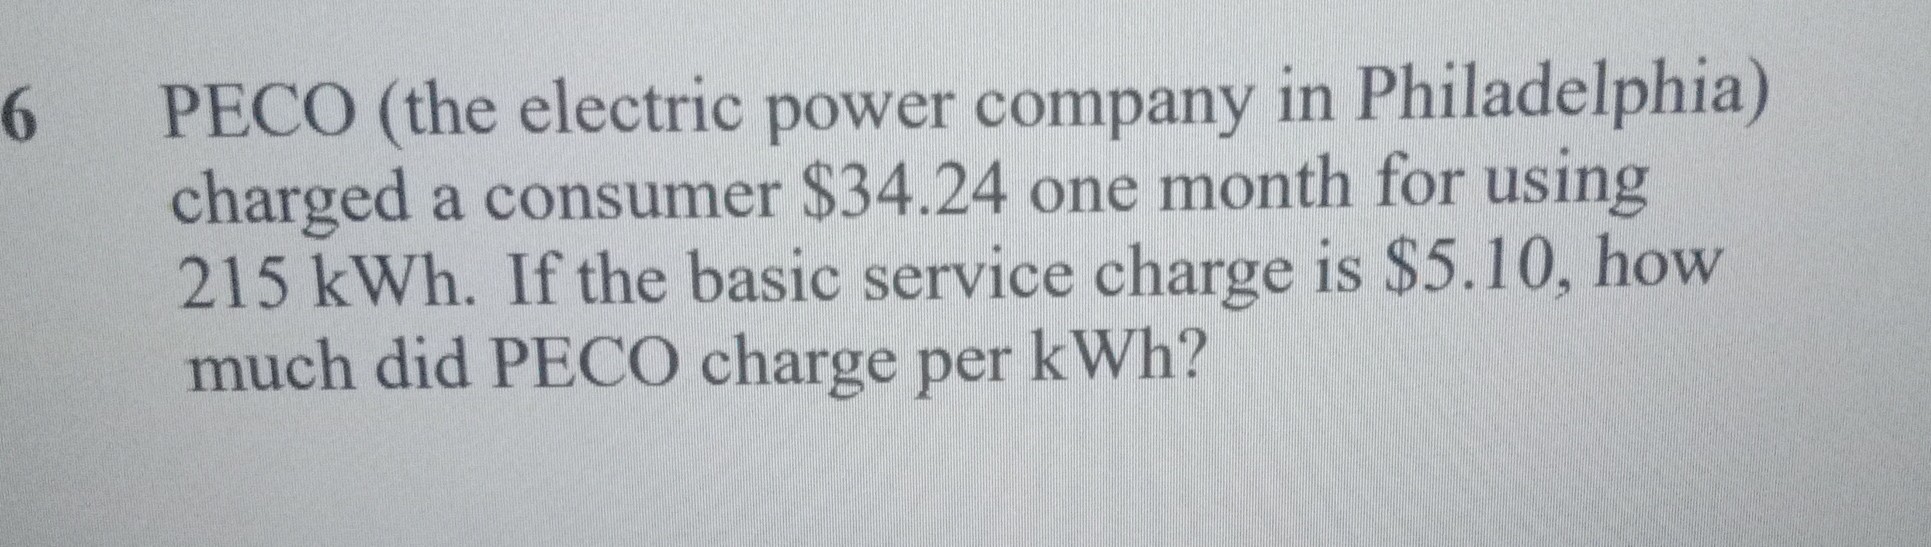 SOLVED 6 PECO (the electric power company in Philadelphia) charged a